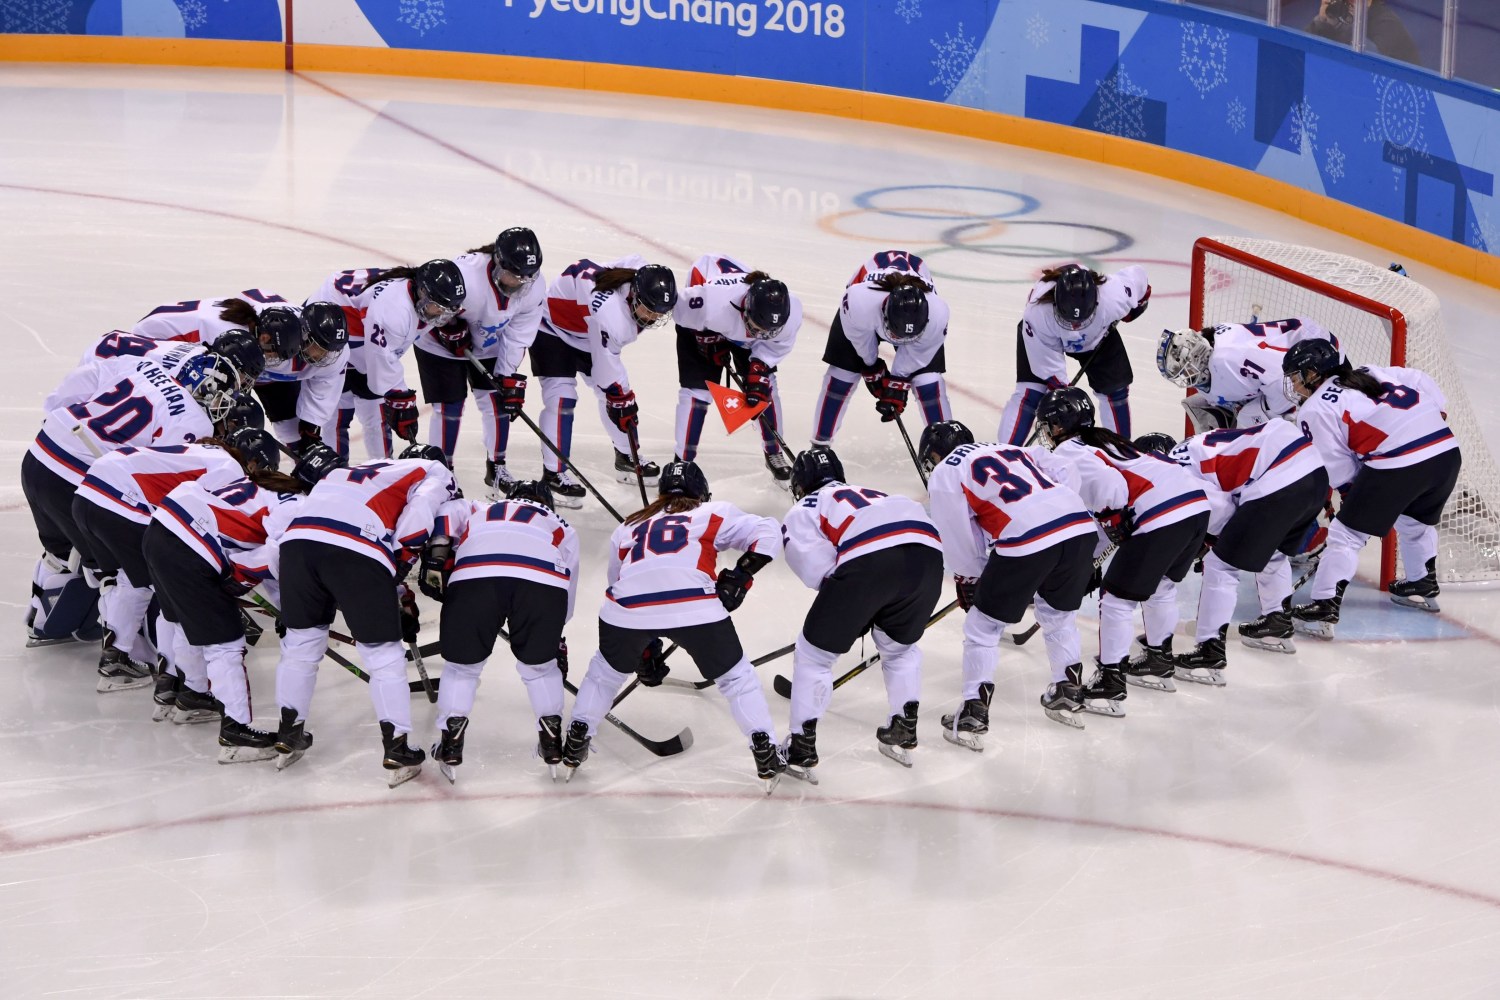 Unified Korean women's ice hockey team debuts at Olympics to